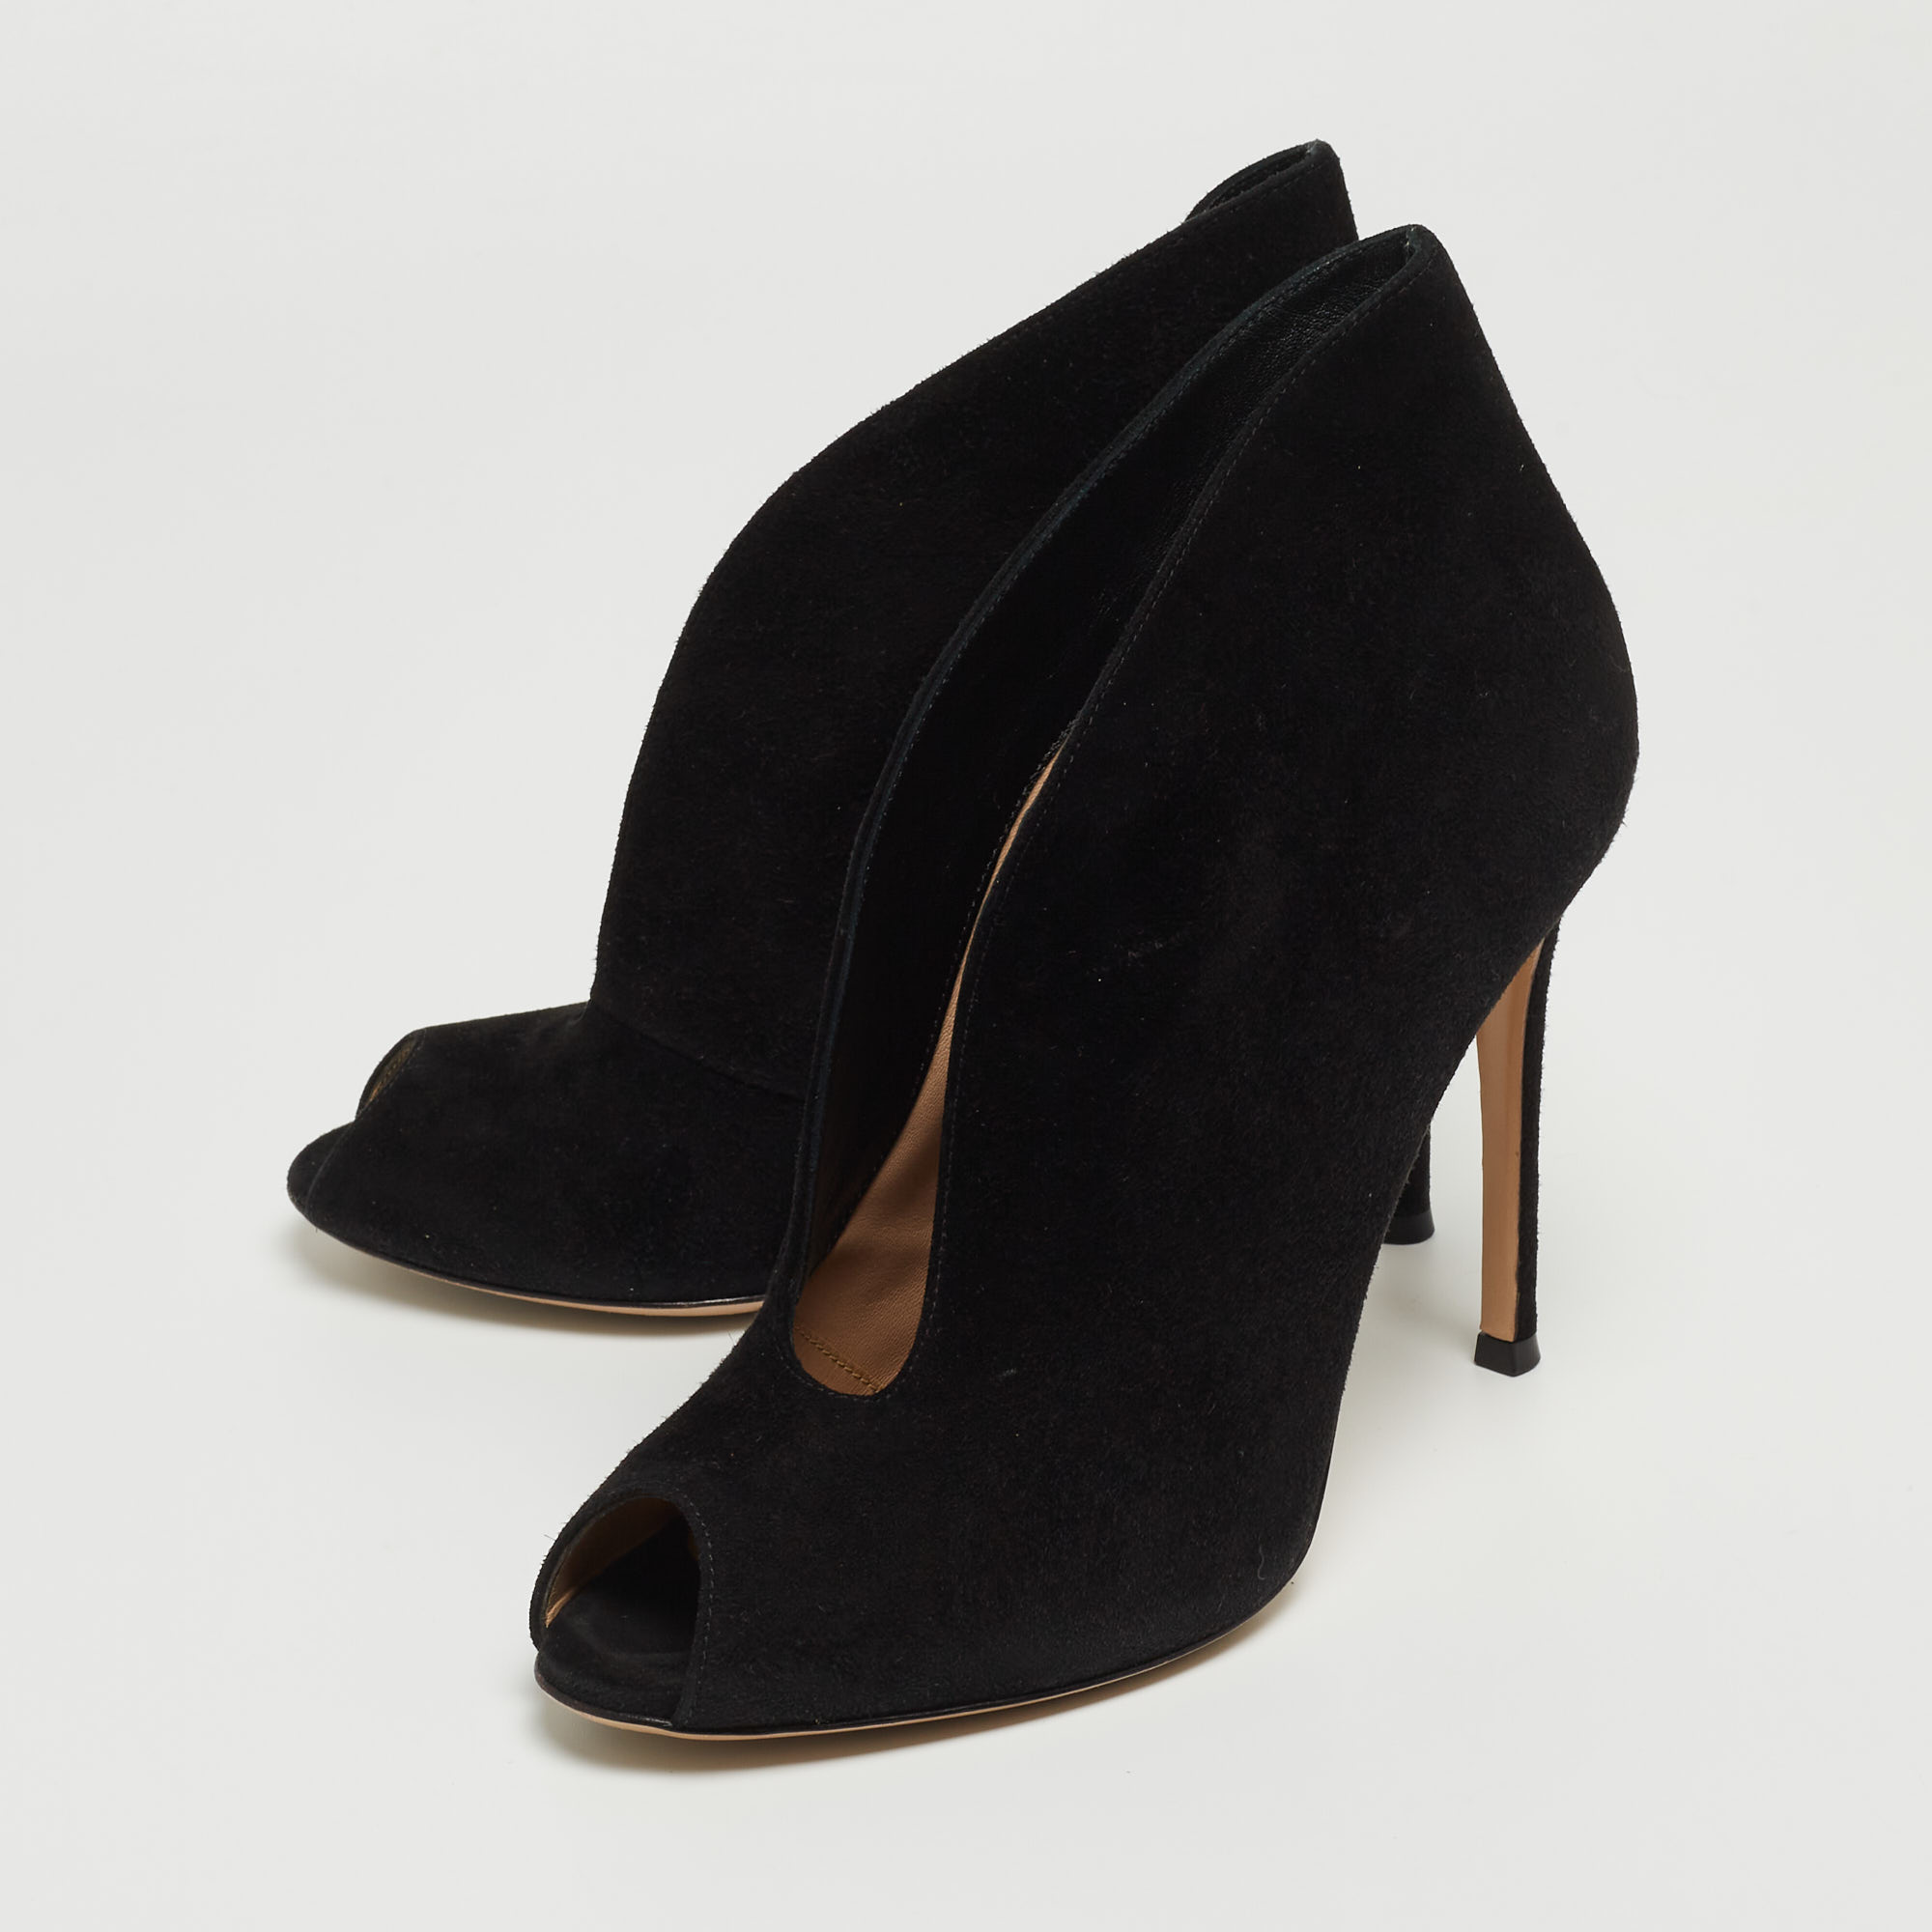 

Gianvito Rossi Black Suede V-Neck Peep Toe Ankle Booties Size